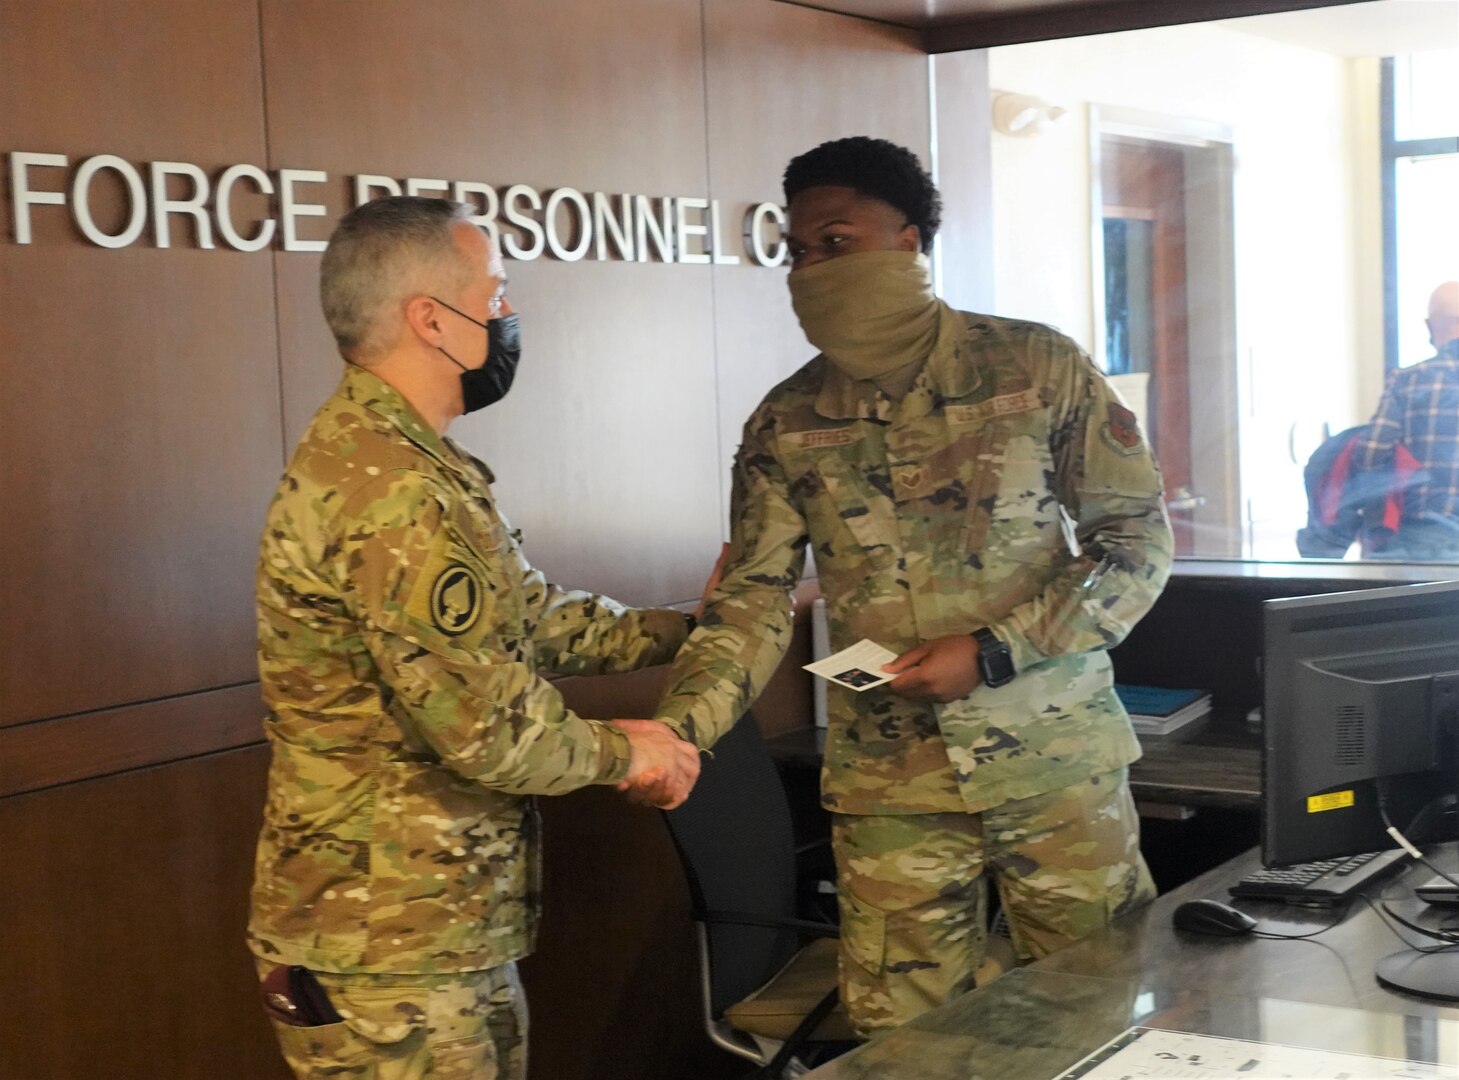 Senior military leader presenting coin to another military member.